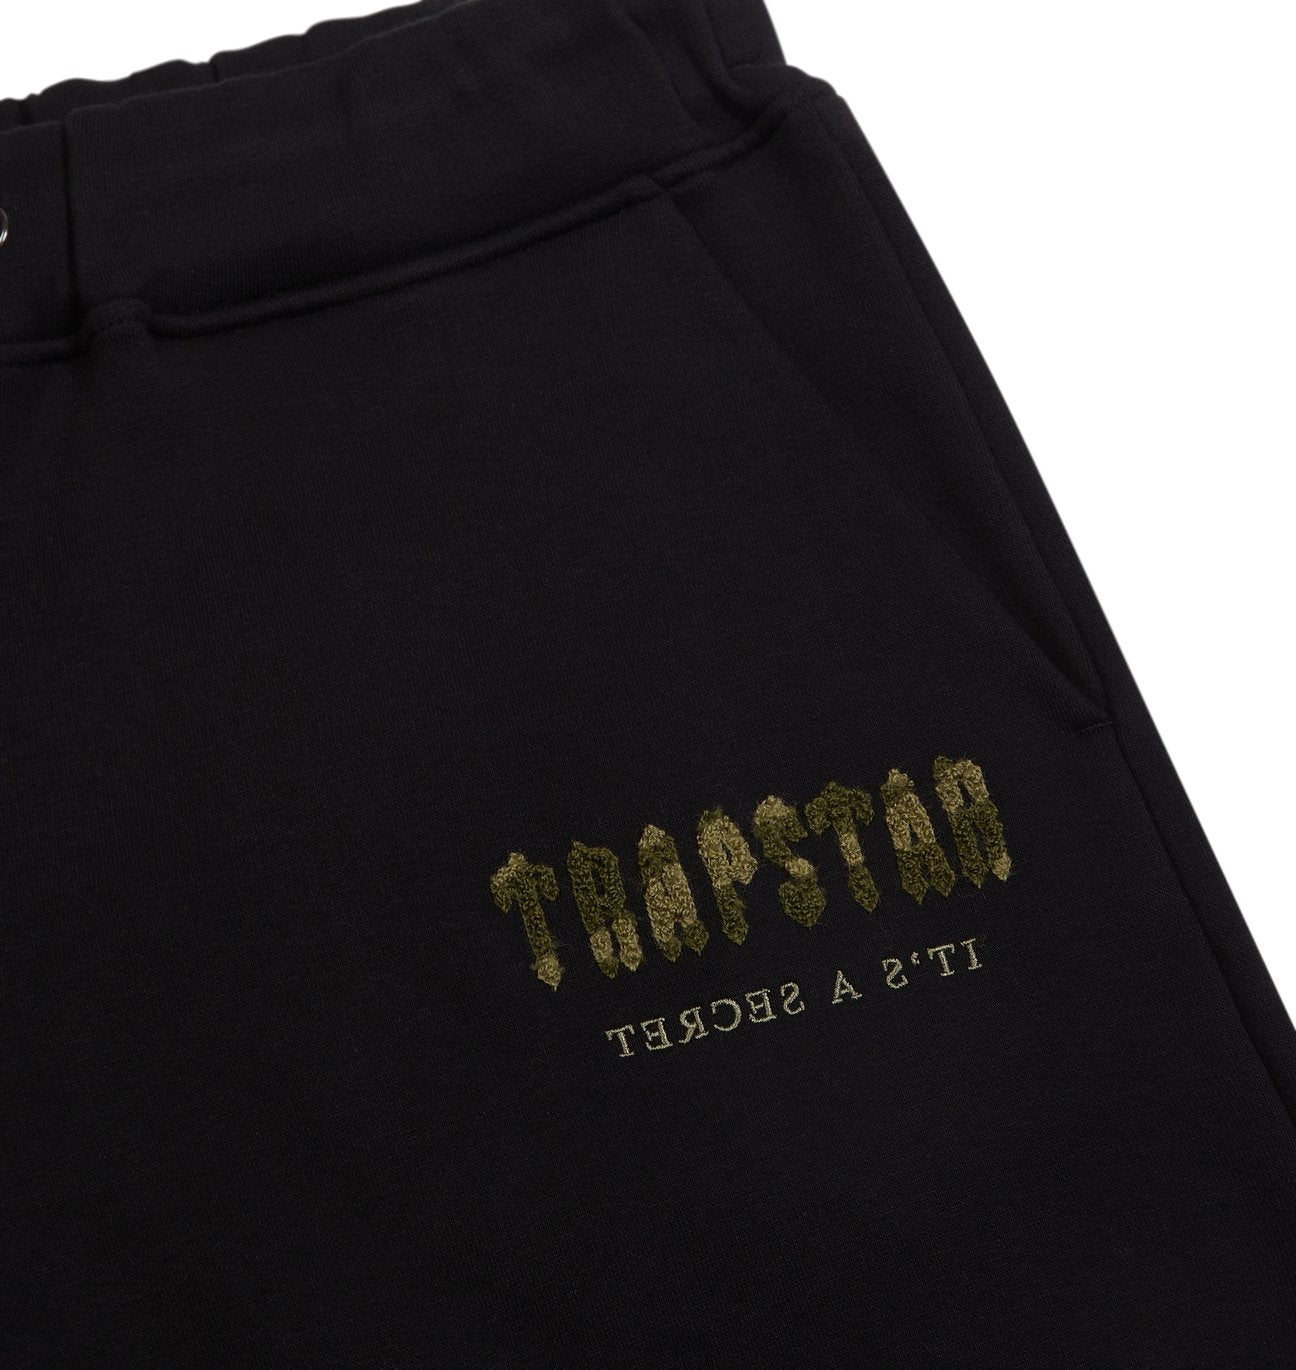 TRAPSTAR CHENILLE DECODED HOODED TRACKSUIT - BLACK CAMO MILITARY EDITION - Hype Locker UK